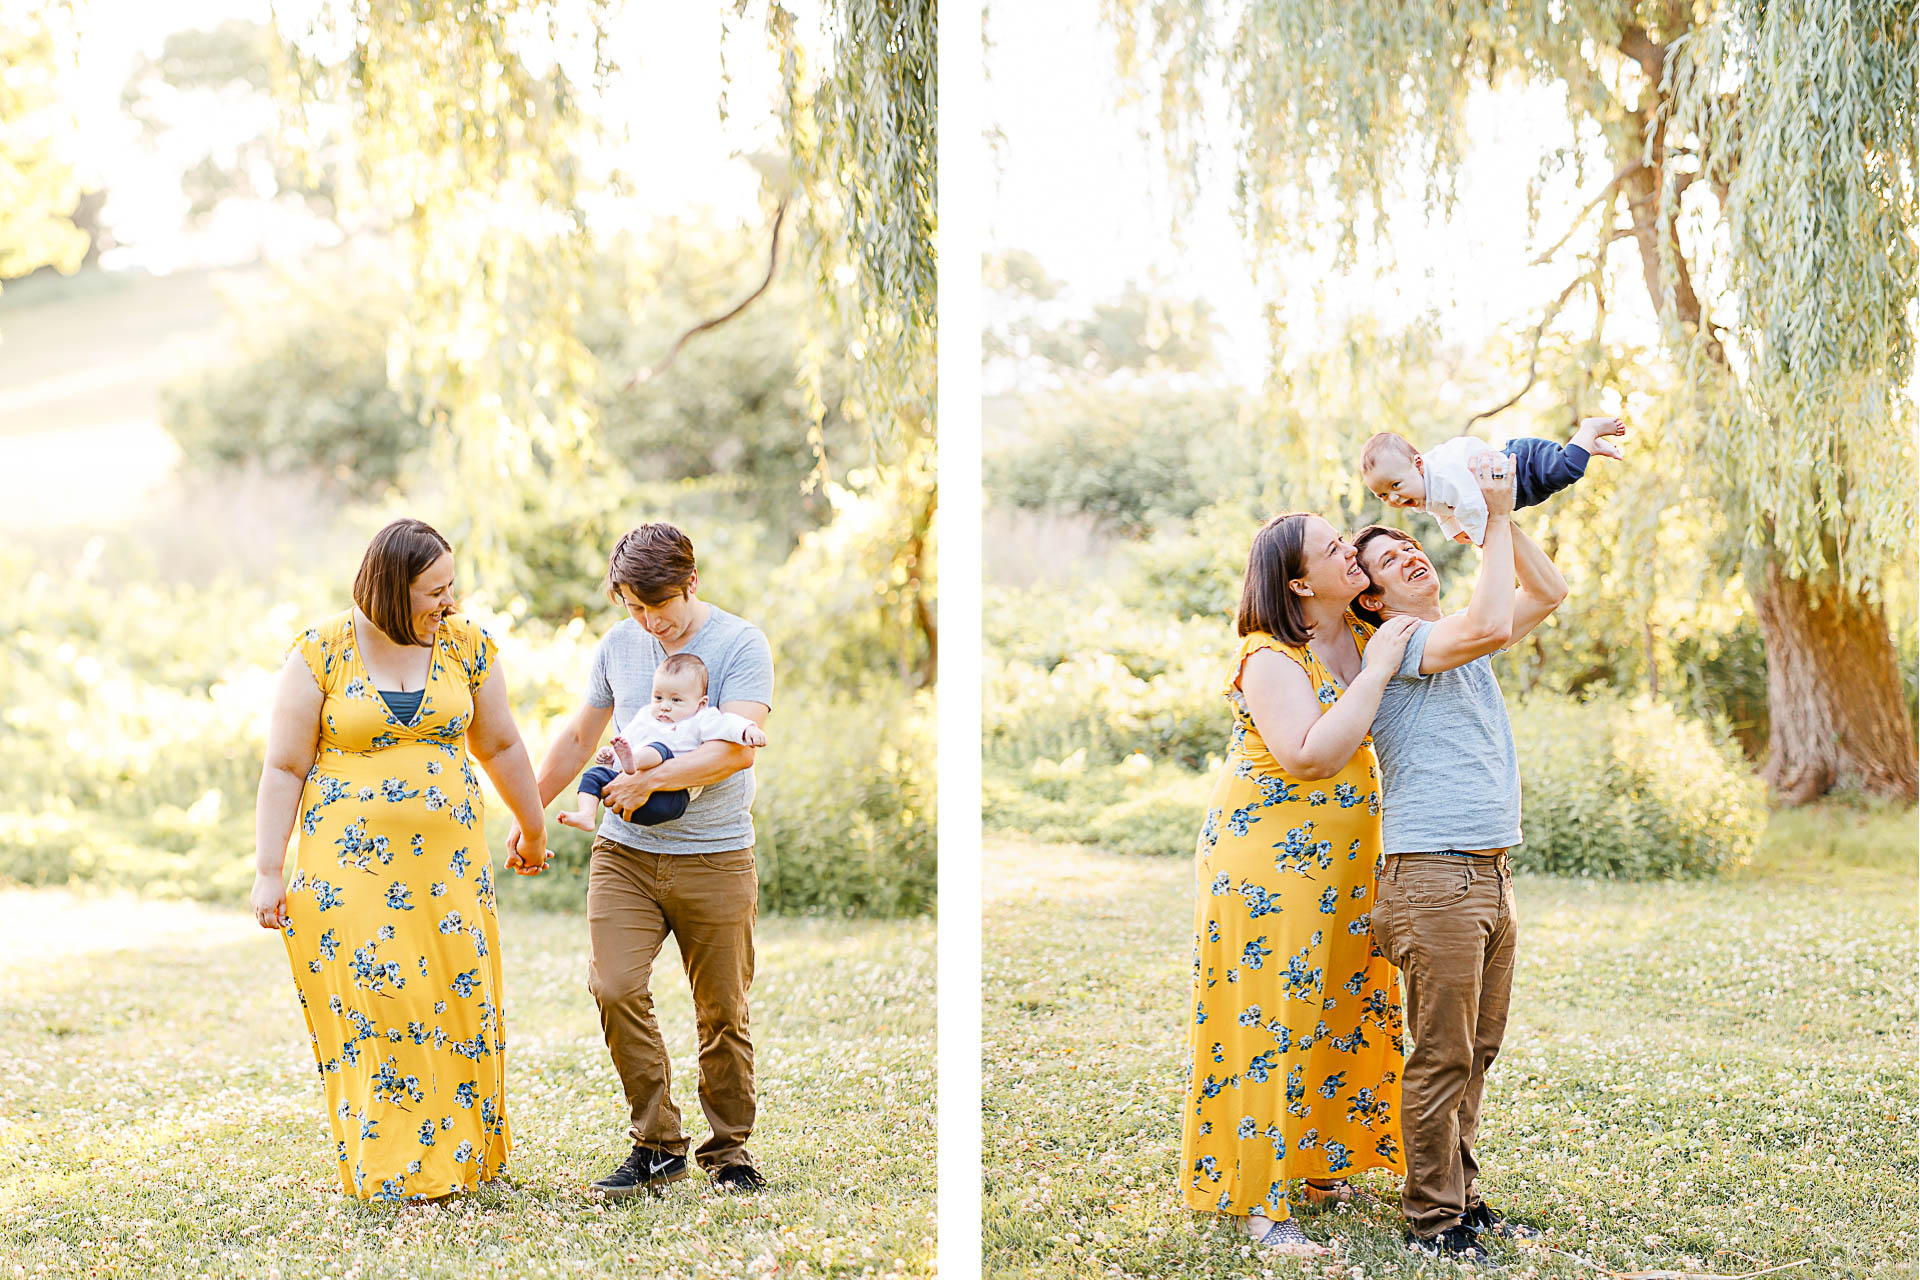 Photos by Cambridge family photographer Christina Runnals | Family with baby boy